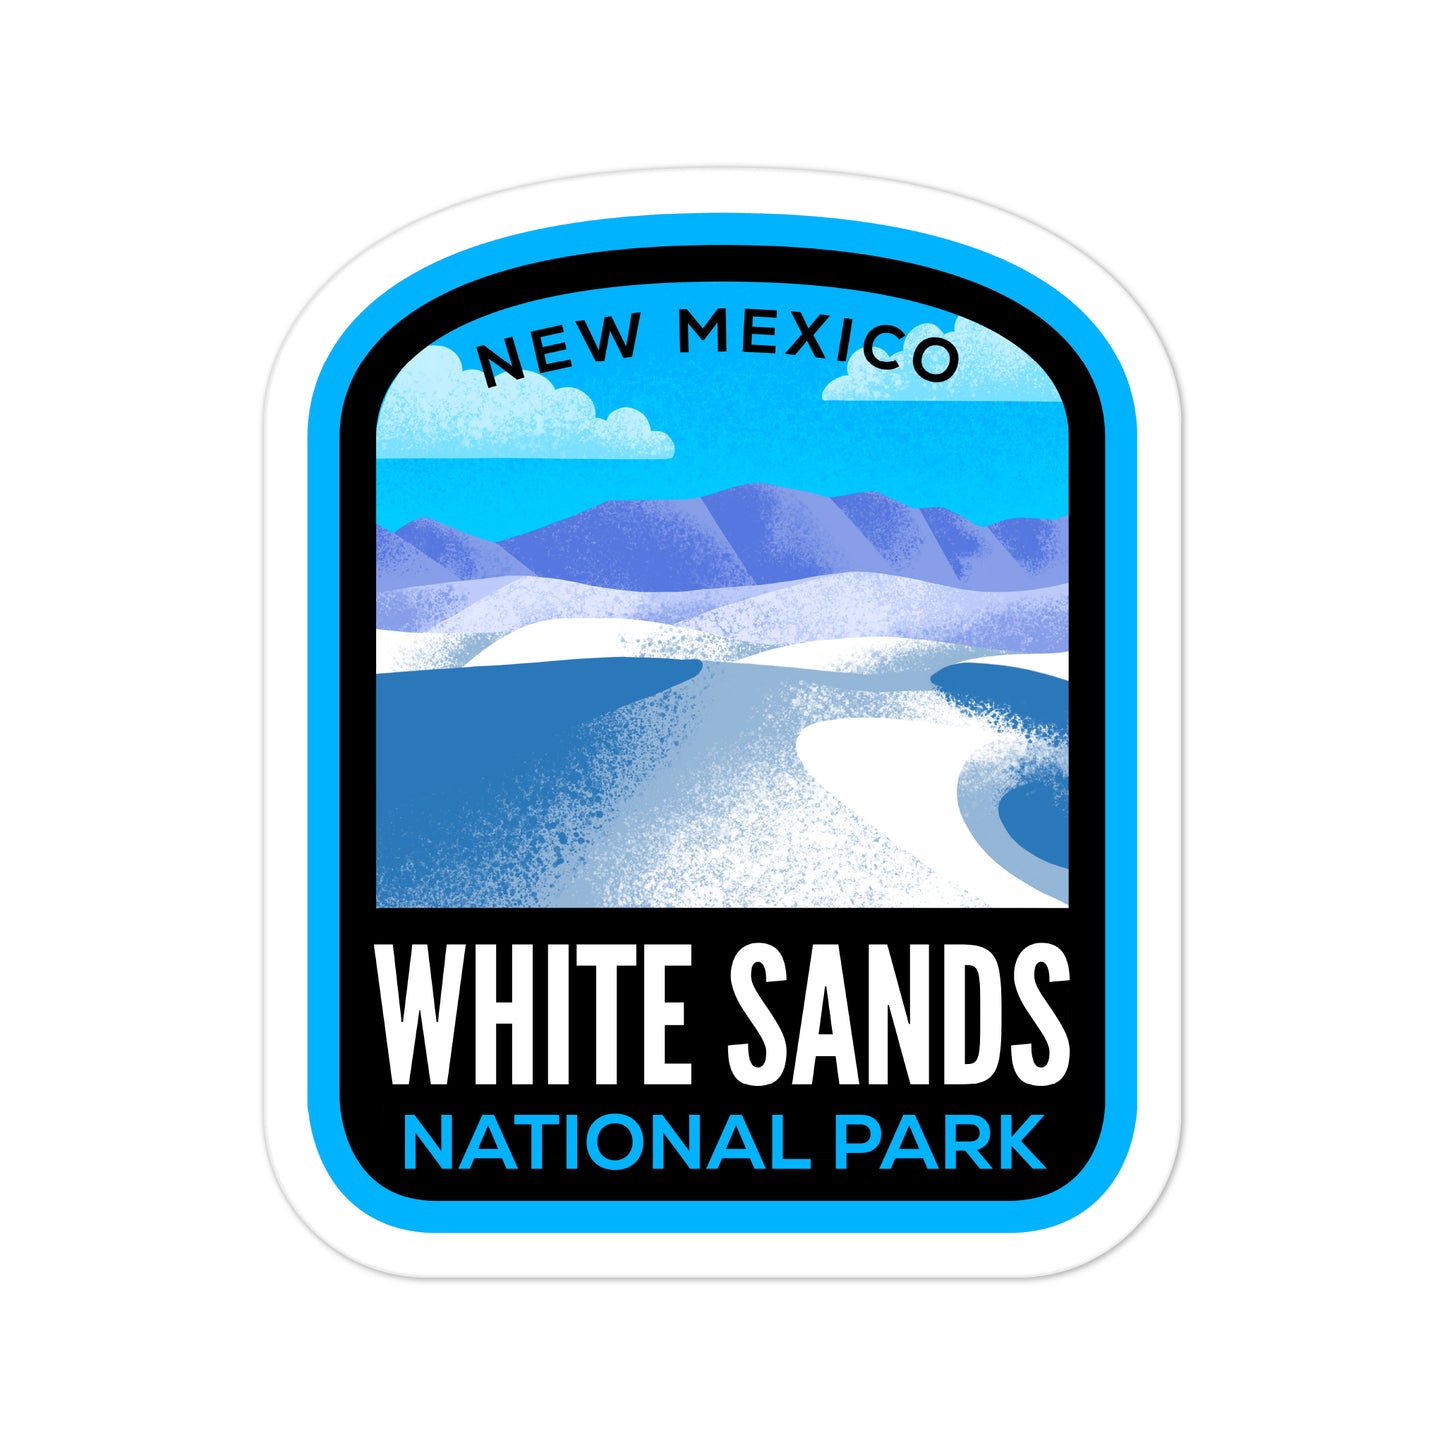 A sticker of White Sands National Park